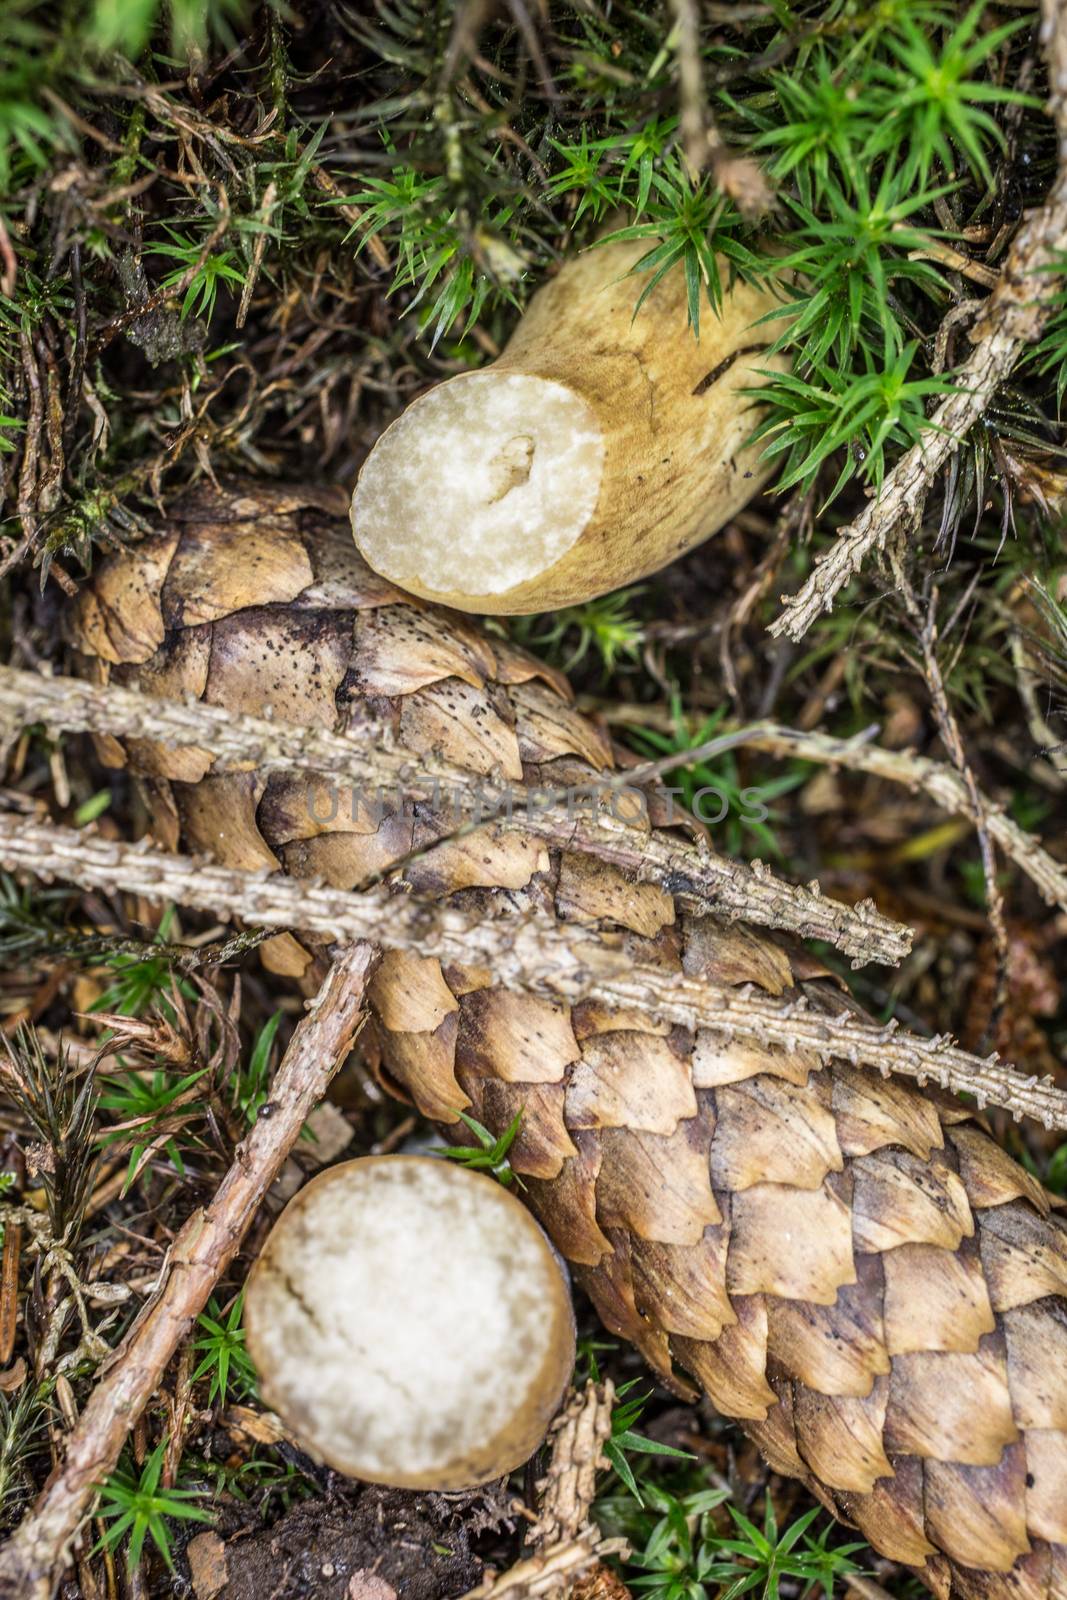 Mushroom stumps in the forest floor with cones